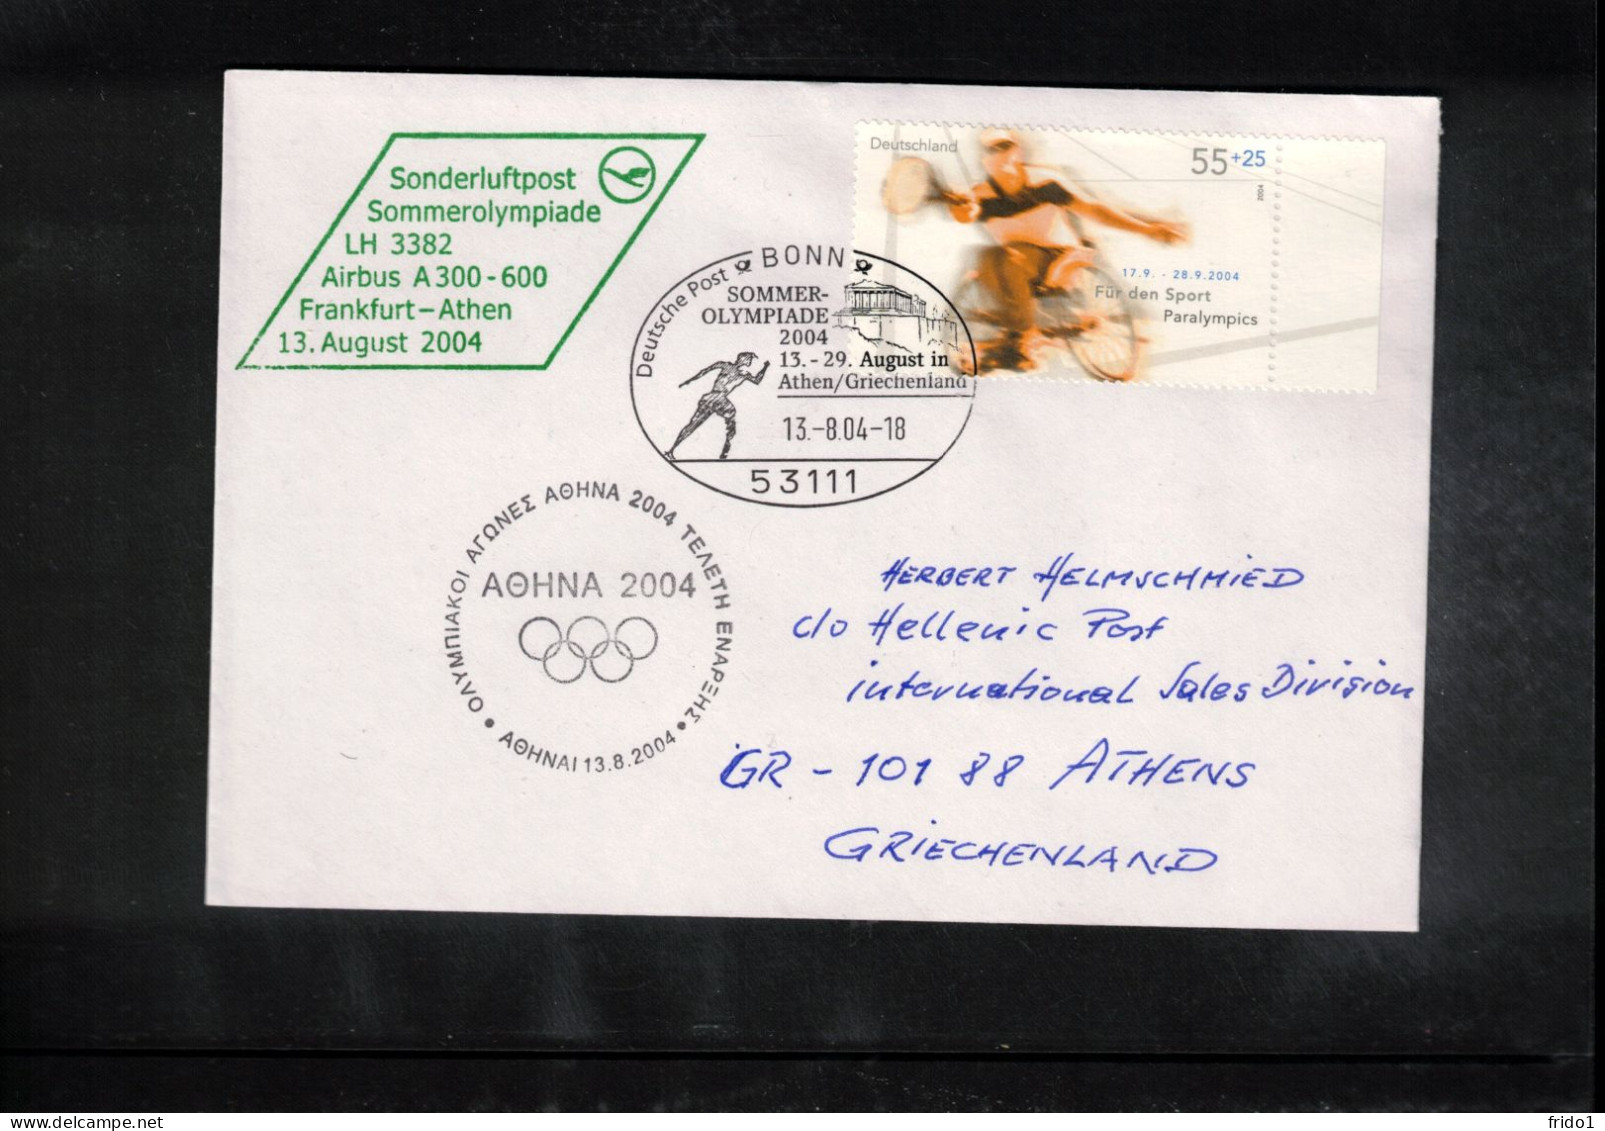 Germany 2004 Olympic Games Athens - Special Lufthansa Flight Frankfurt - Athens Interesting Cover - Ete 2004: Athènes